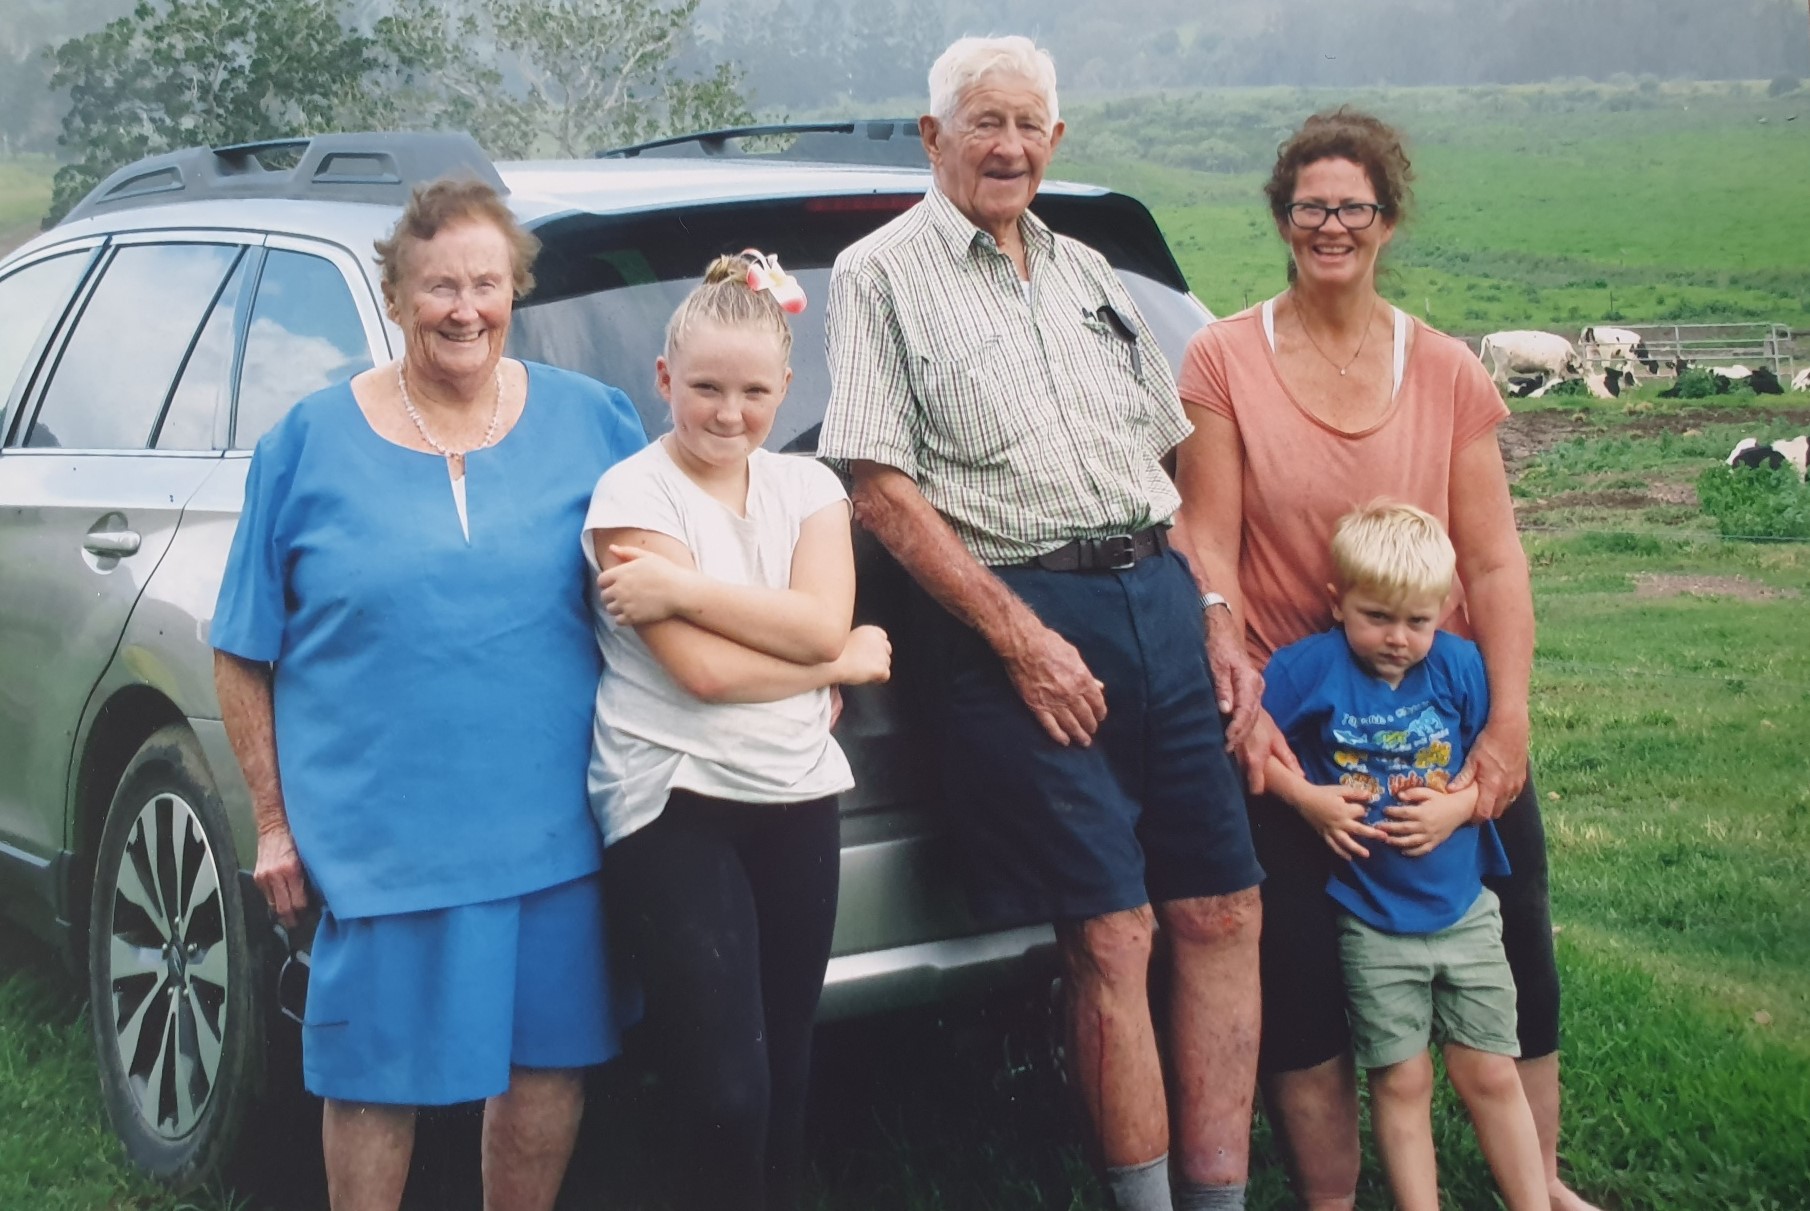 Jan and Ron McKenzie with their daughter Libby Rough and grandchildren Jessica and Arthur Rough.